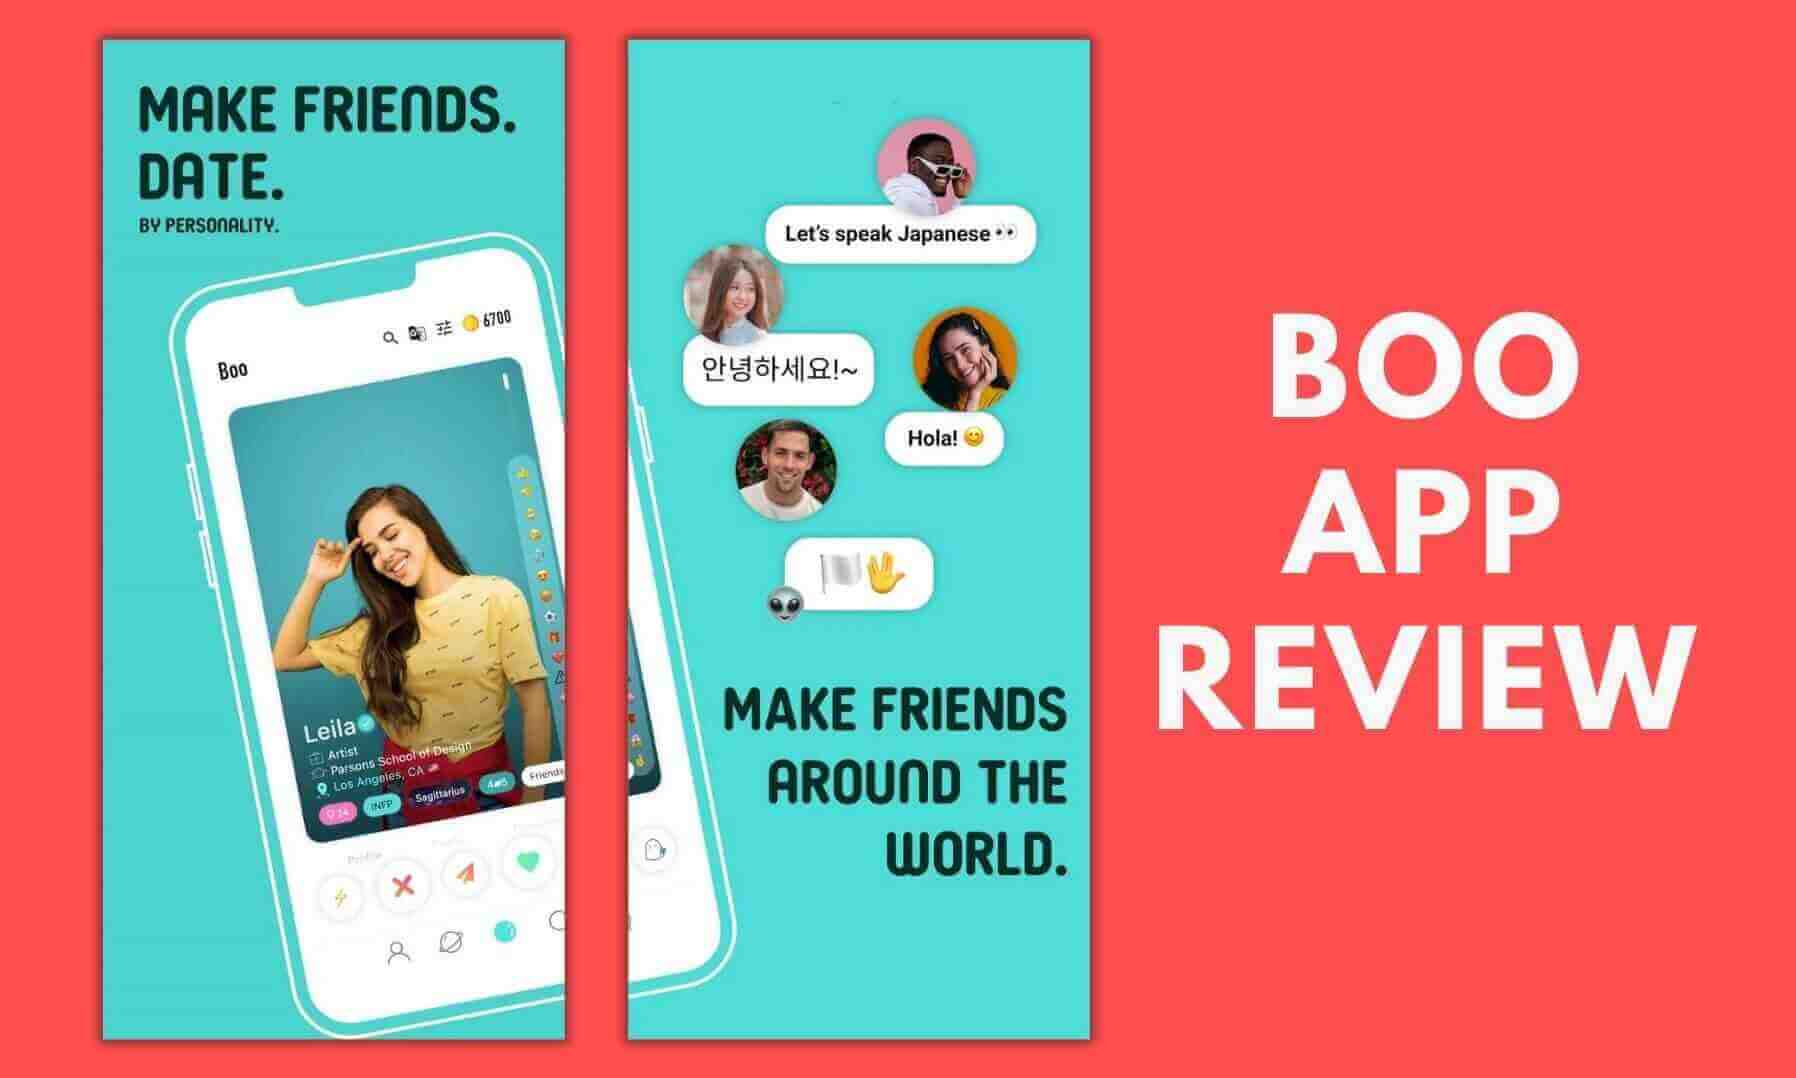 Boo App Review